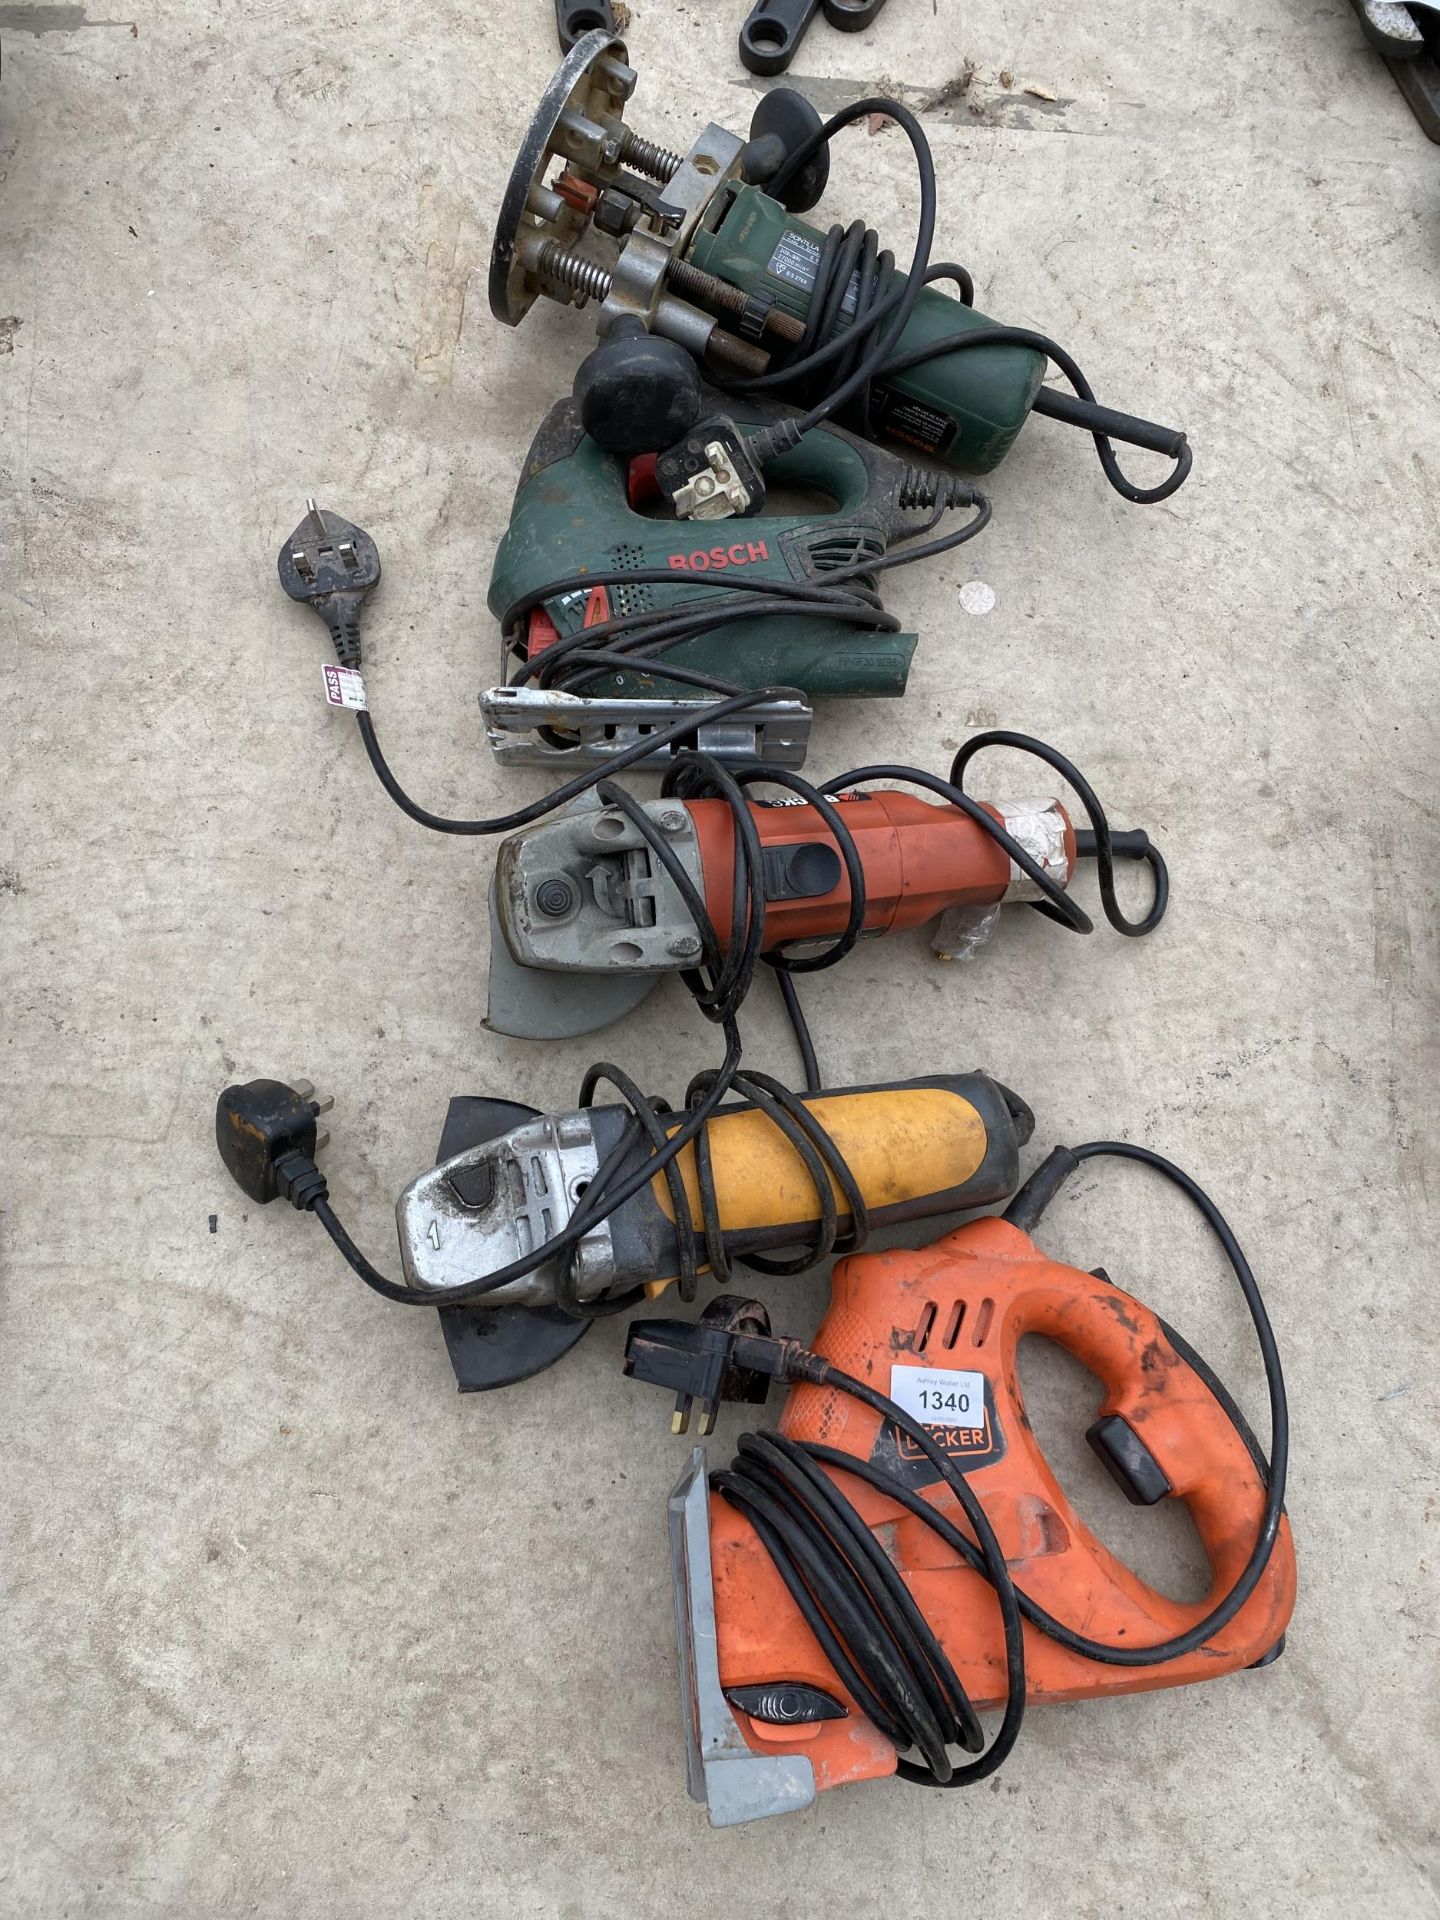 FIVE POWER TOOLS TO INCLUDE TWO GRINDERS AND A BOSCH JIGSAW ETC